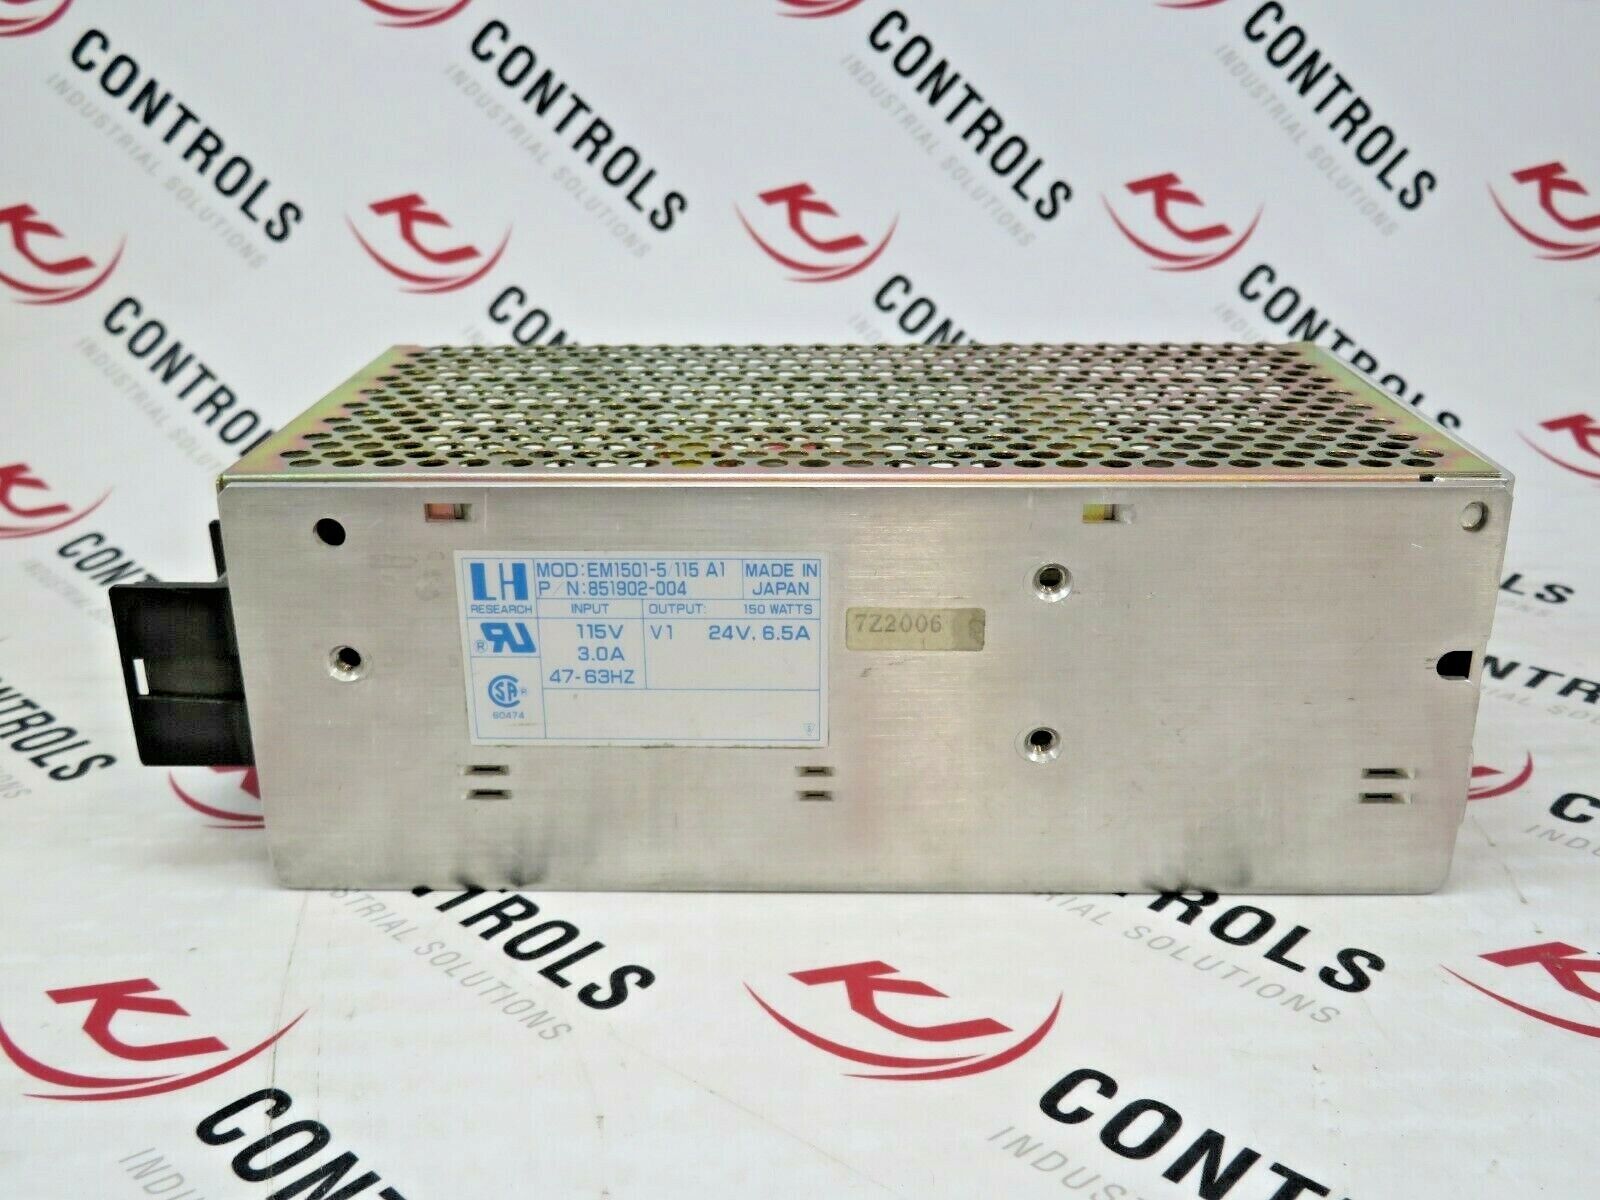 LH Research EM1501-5/115 A1 851902-004 Power Supply 24VDC 6.5A Output